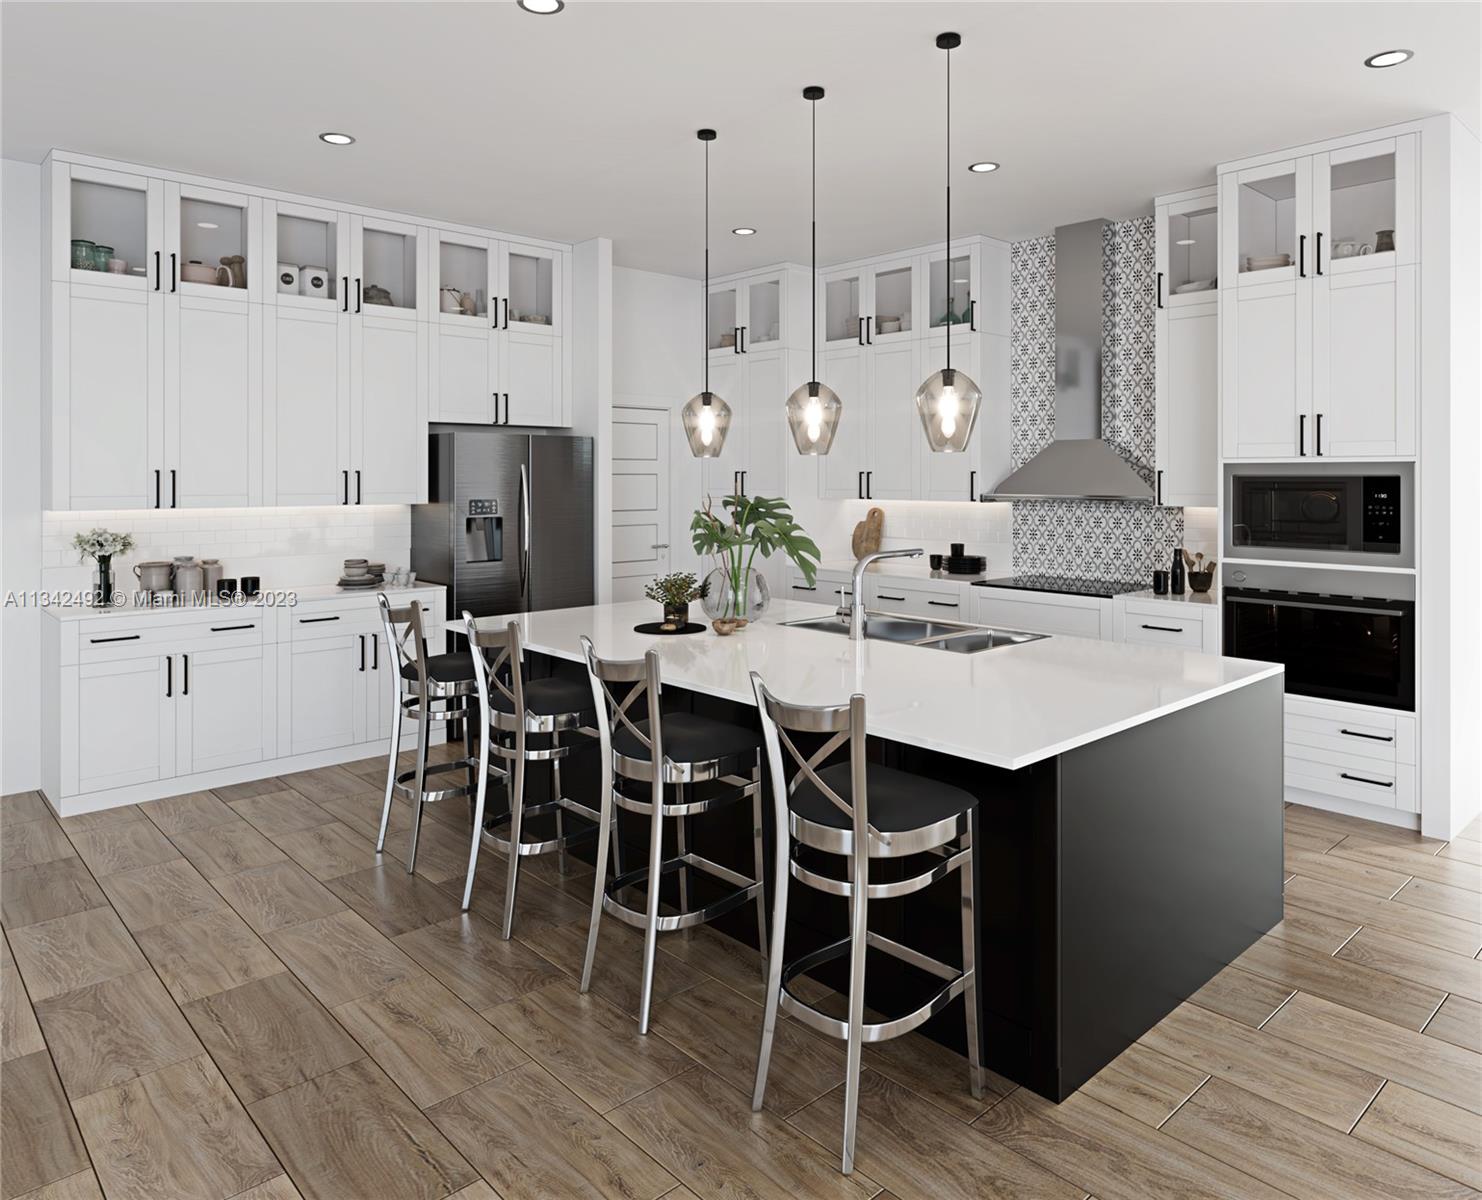 EXAMPLE OF KITCHEN OPTIONS- JUST A RENDERING